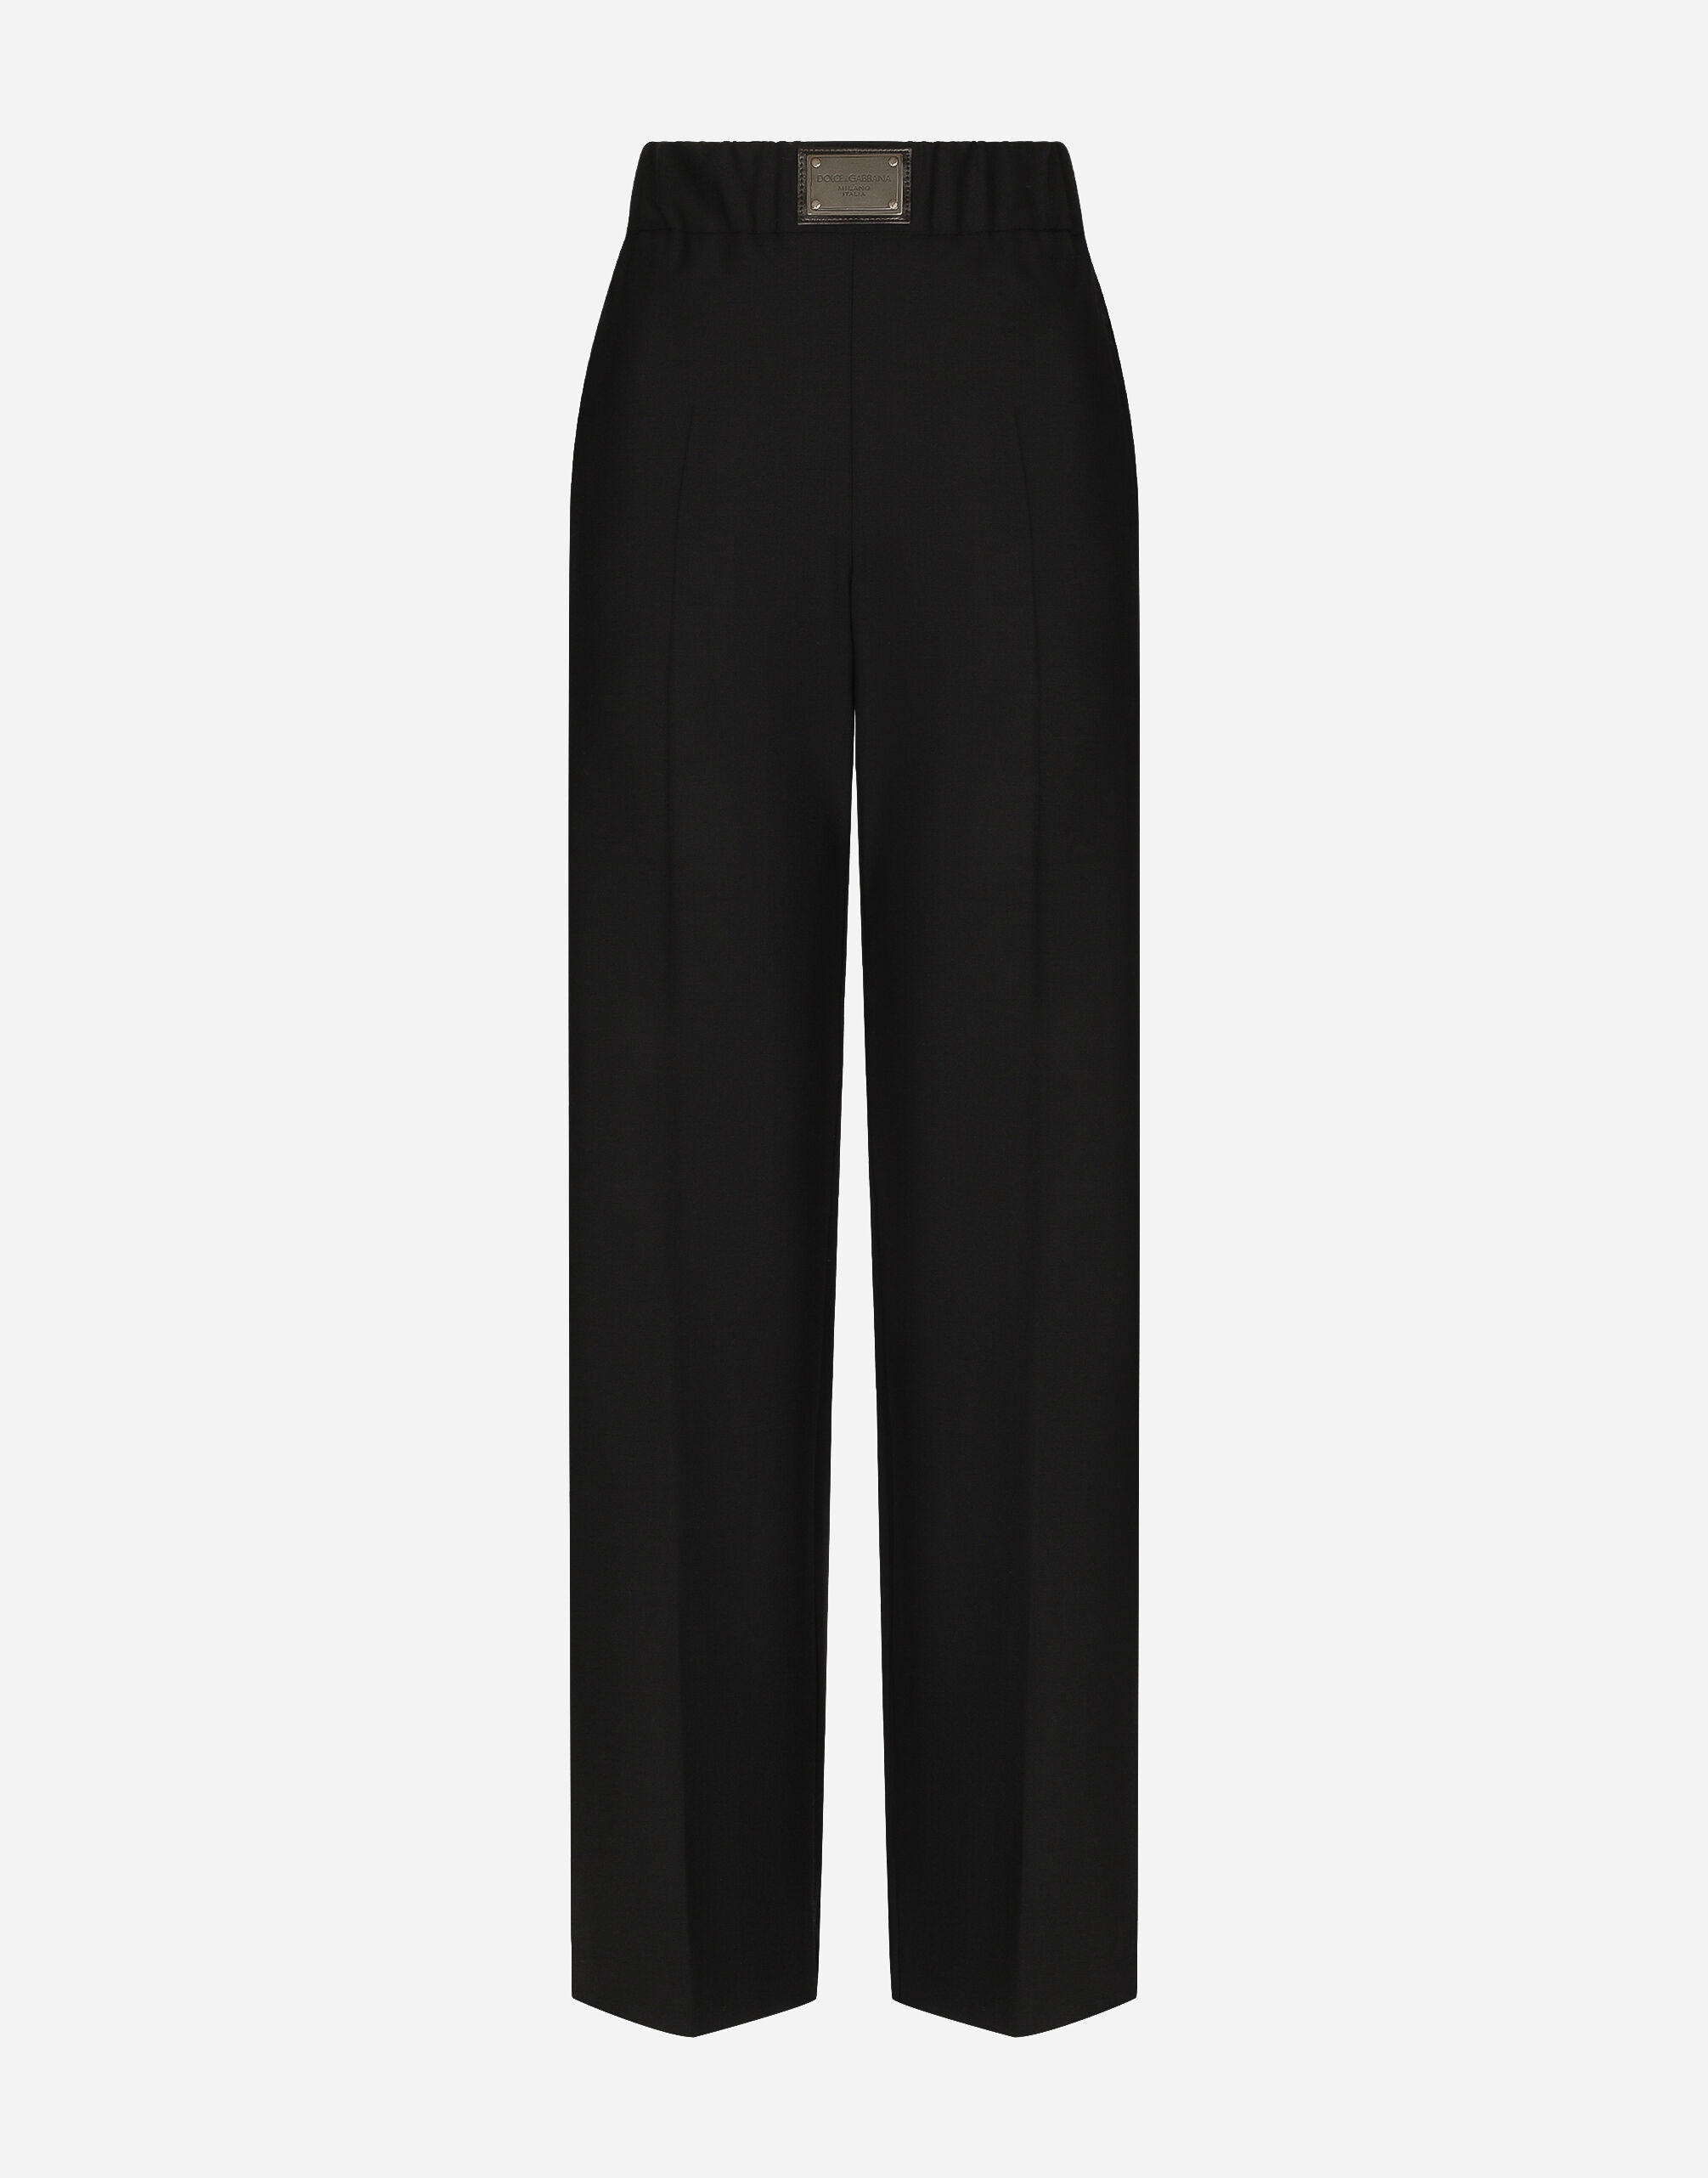 Dolce & Gabbana Flared wool pants with logo tag Print FTC3HTHS5Q0